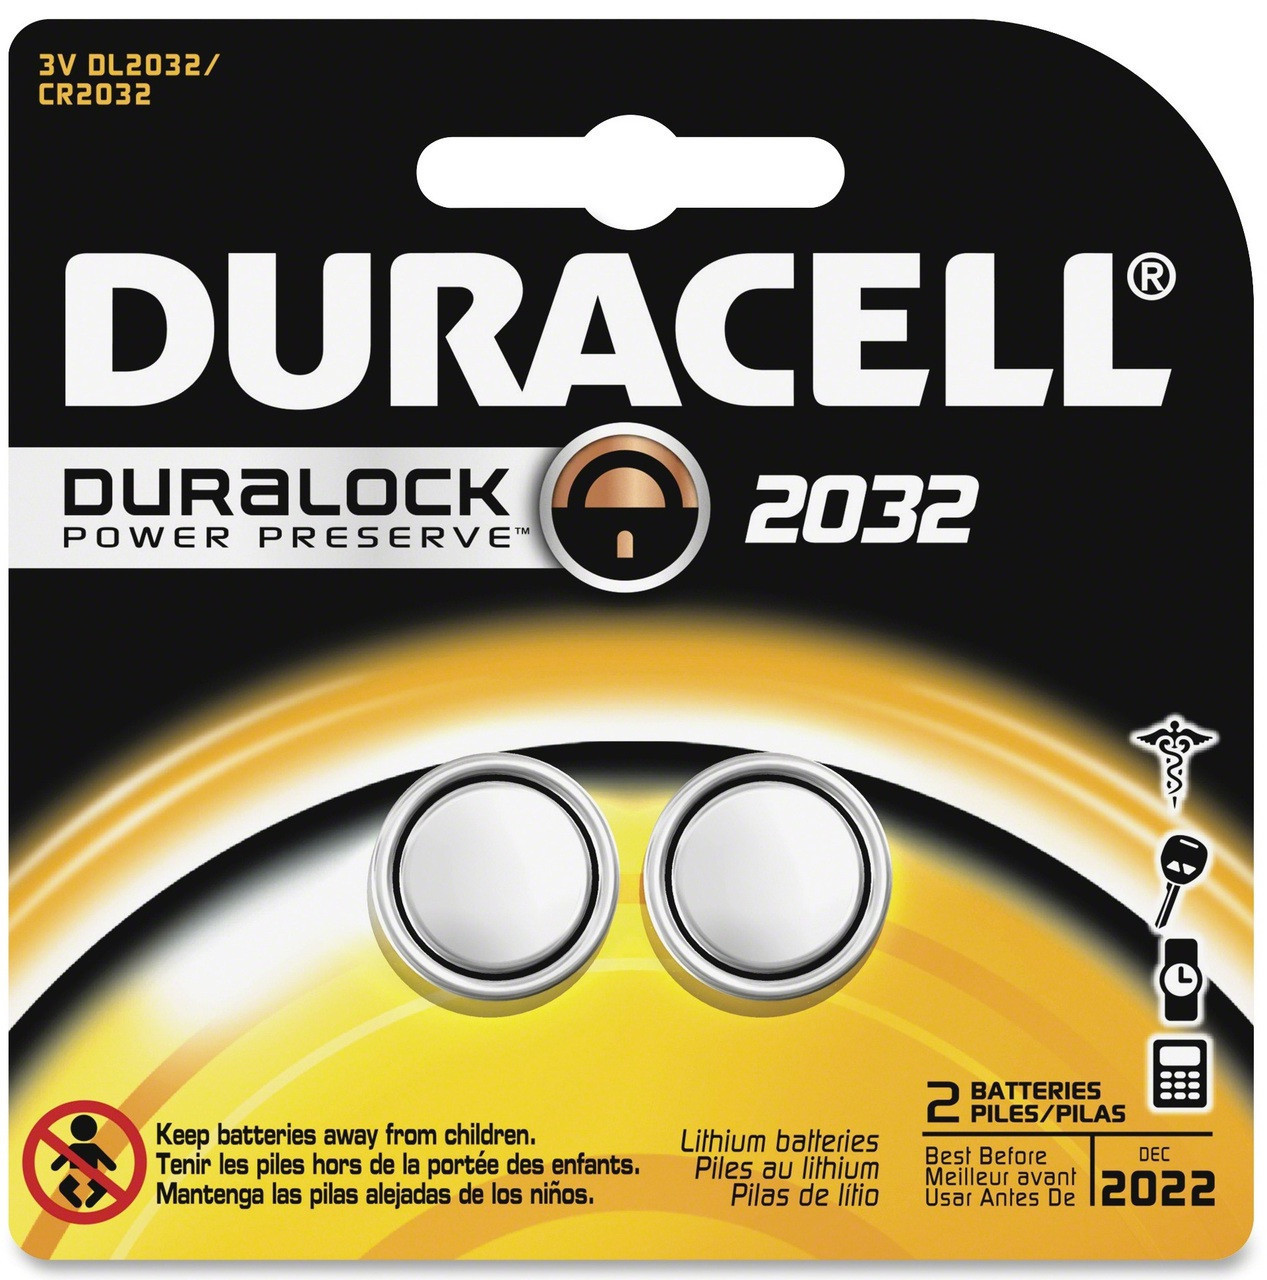 https://cdn11.bigcommerce.com/s-0f141/images/stencil/1280x1280/products/74368/99941/duracell-2032-coin-battery-2-pack-on-retail-card-free-shipping__11687.1671282284.jpg?c=2